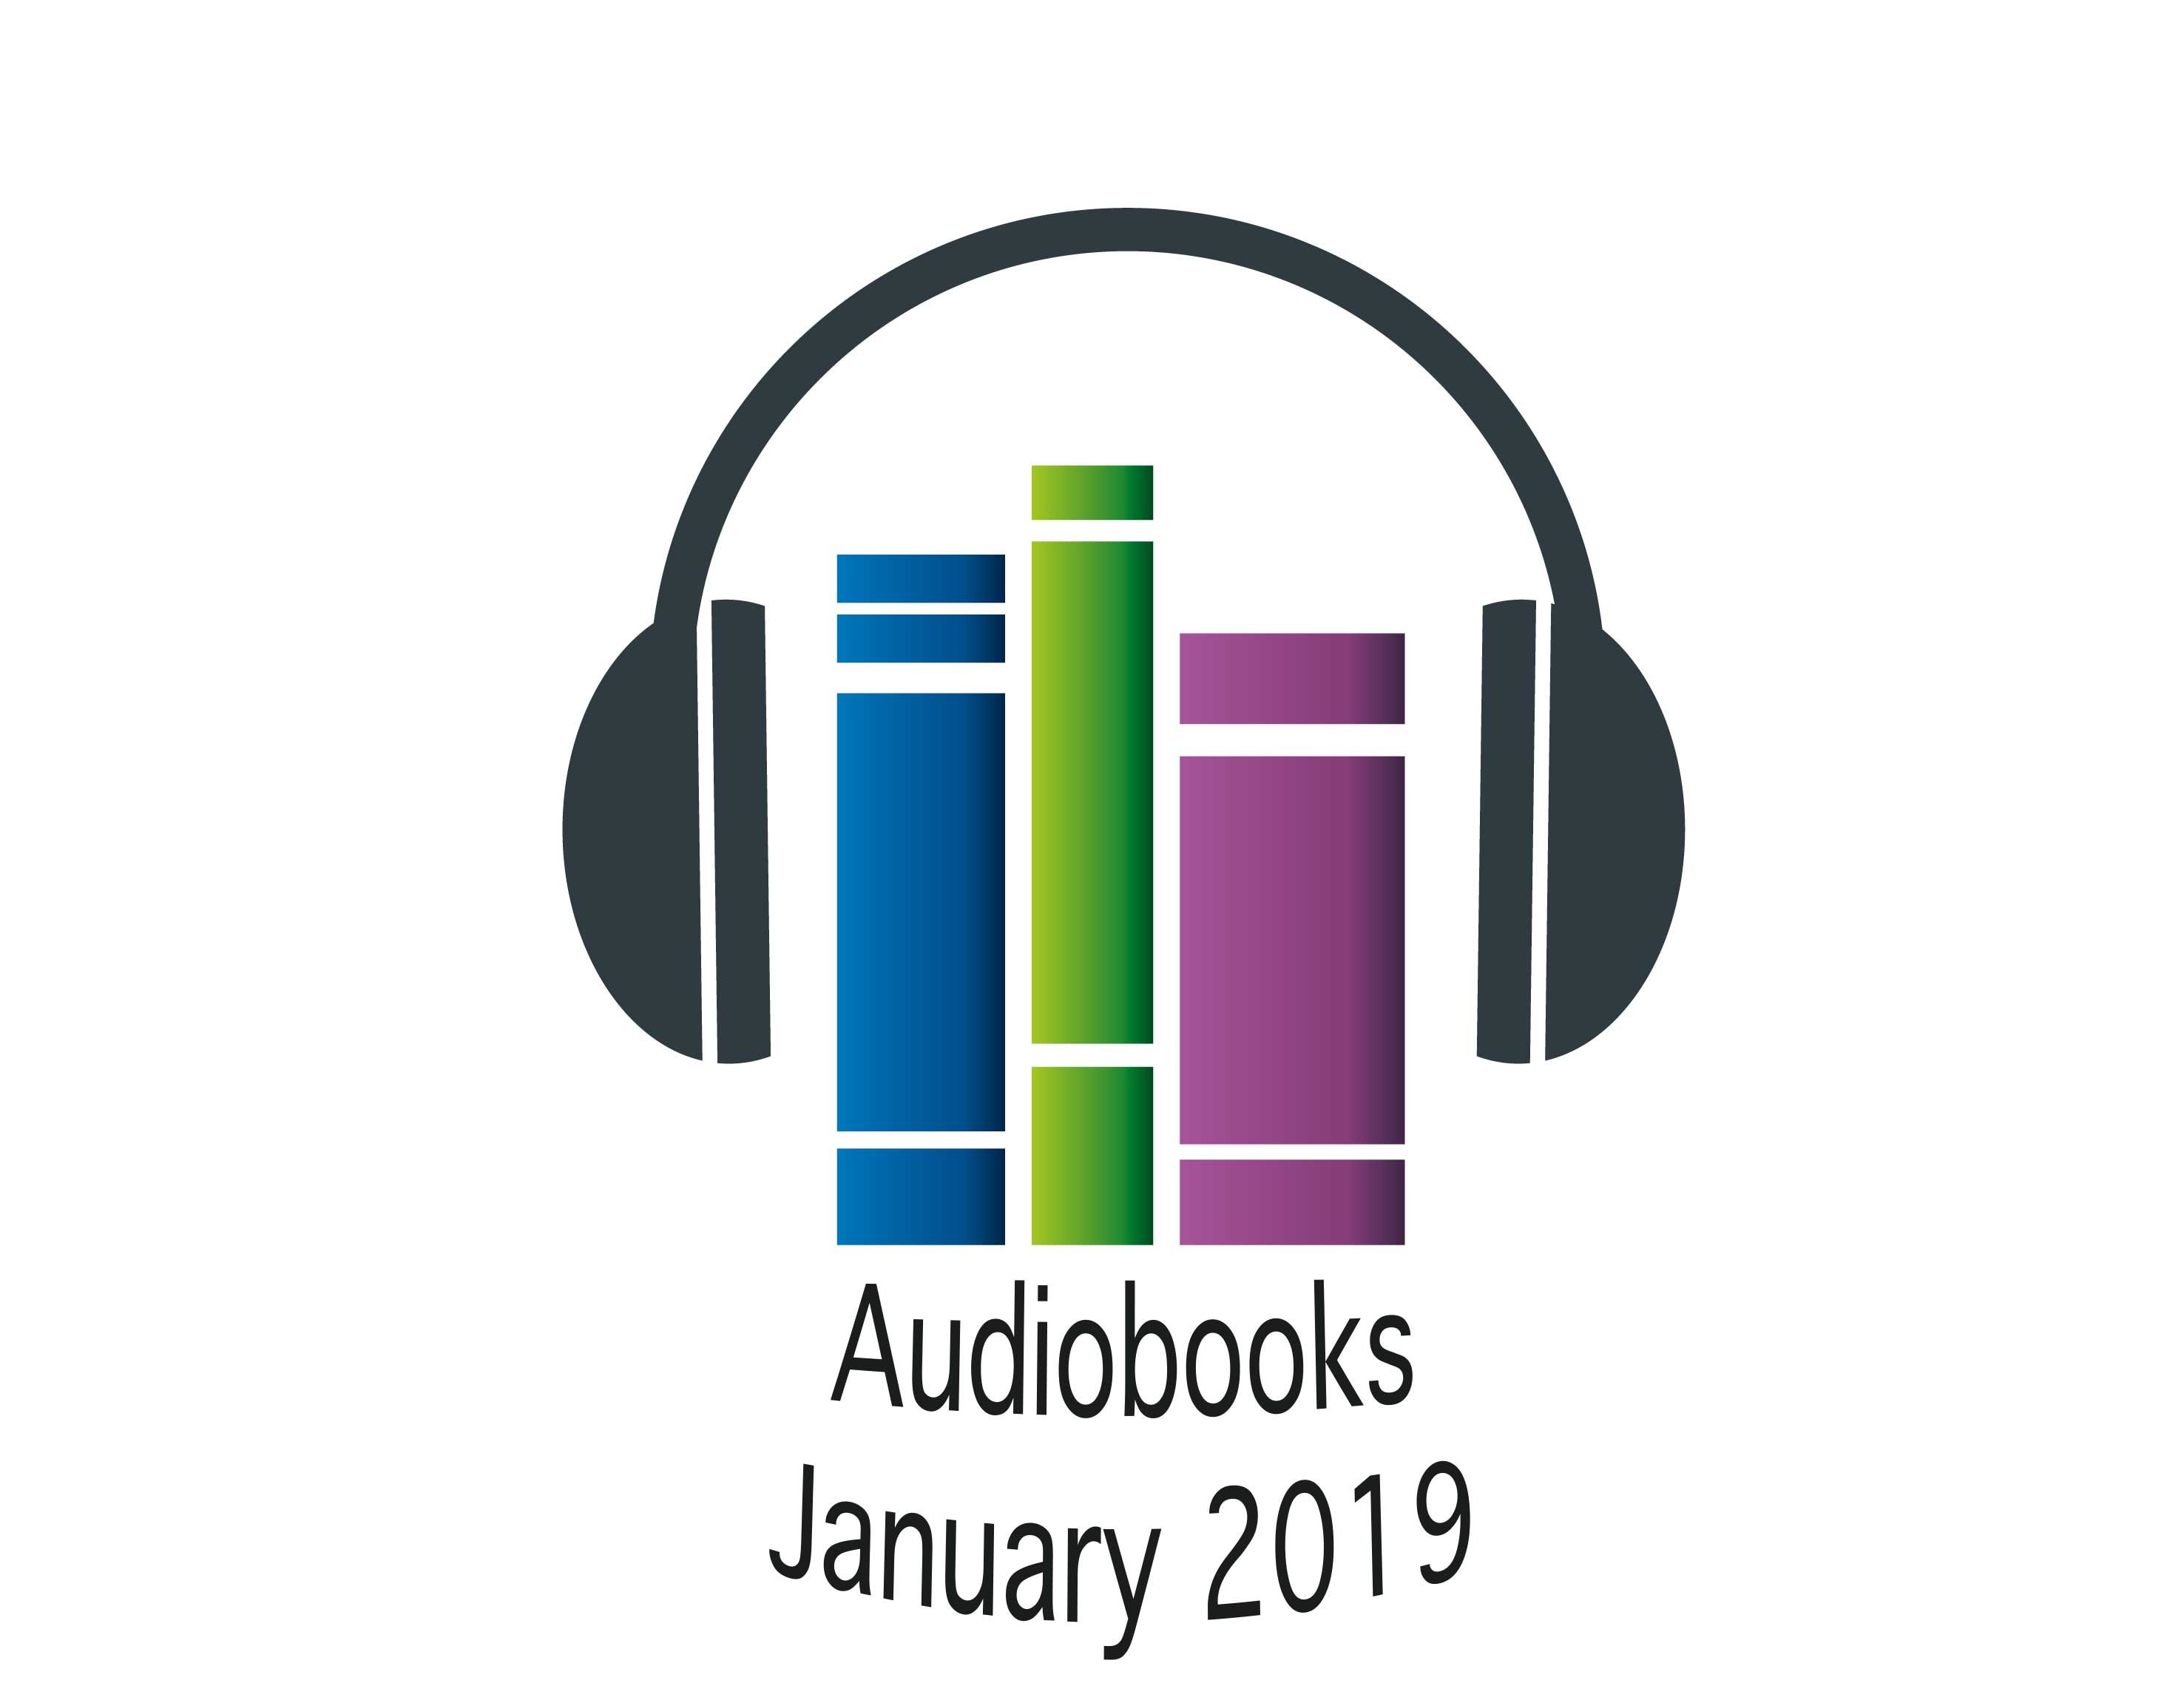 Audiobooks concept with colorful bar graph and headphones, symbolizing audio listening trends or popularity in january 2019.